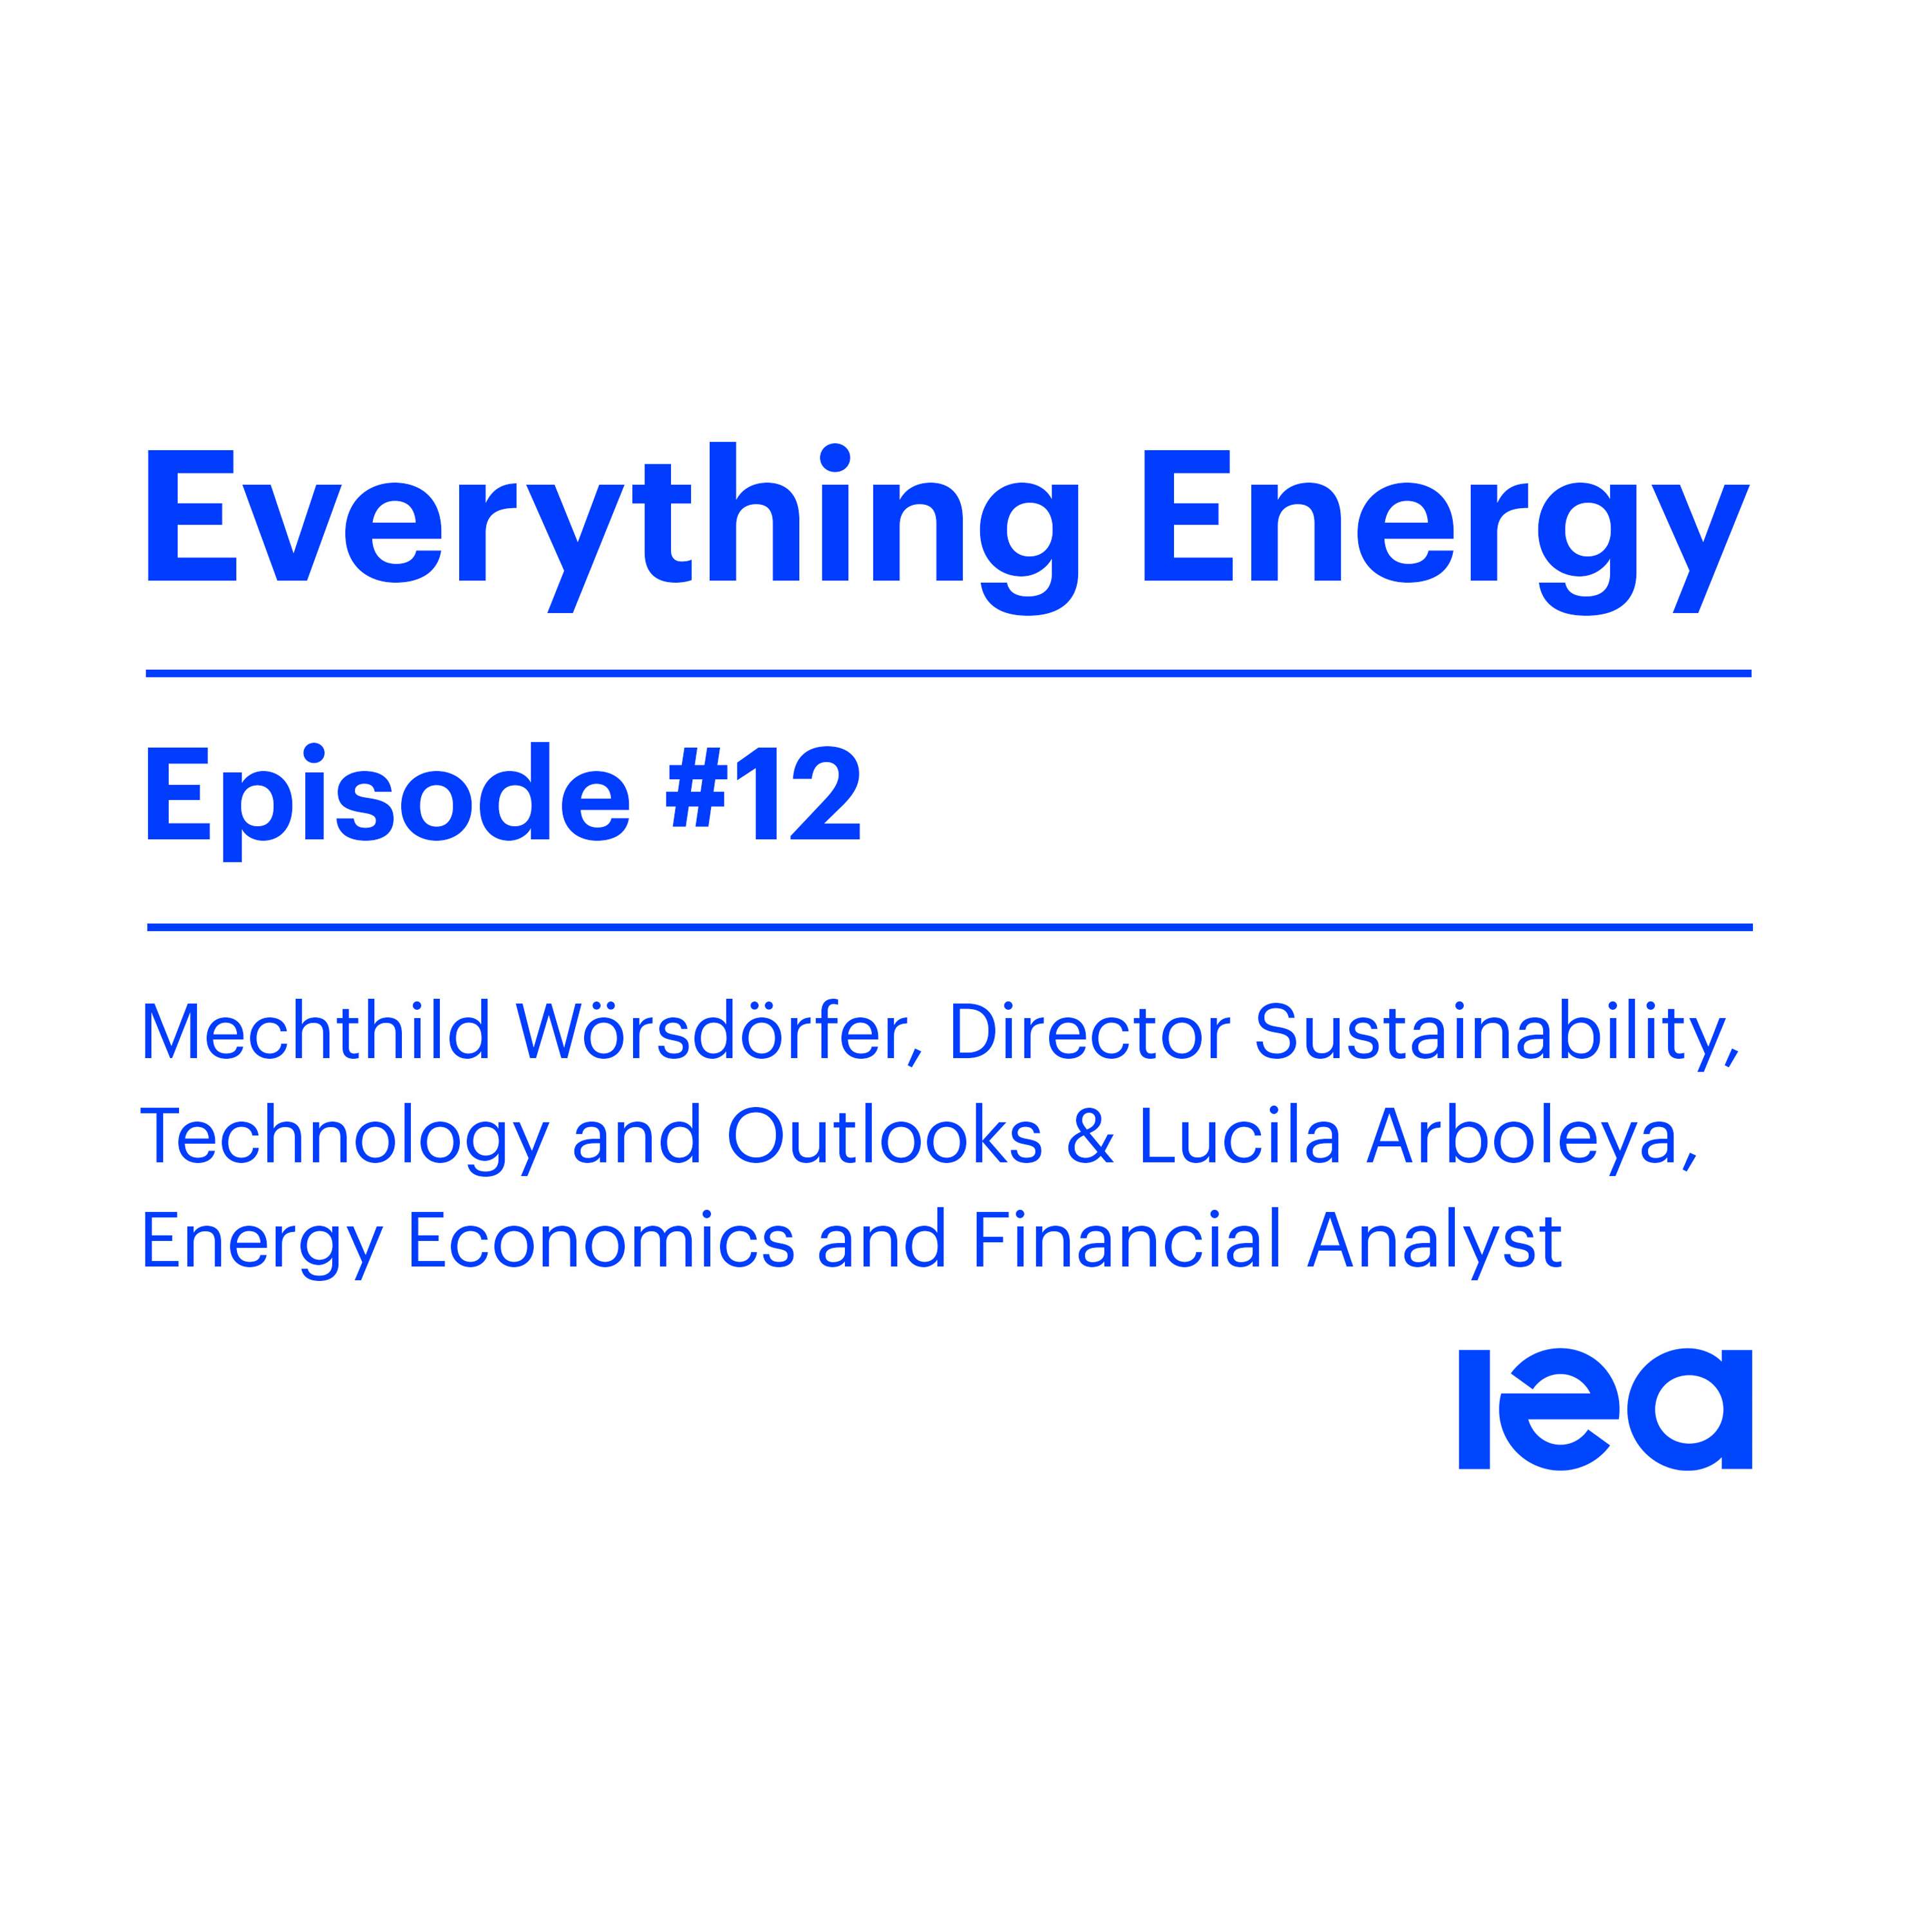 Episode 12: Gender diversity in the energy sector is critical to achieving net-zero ambitions